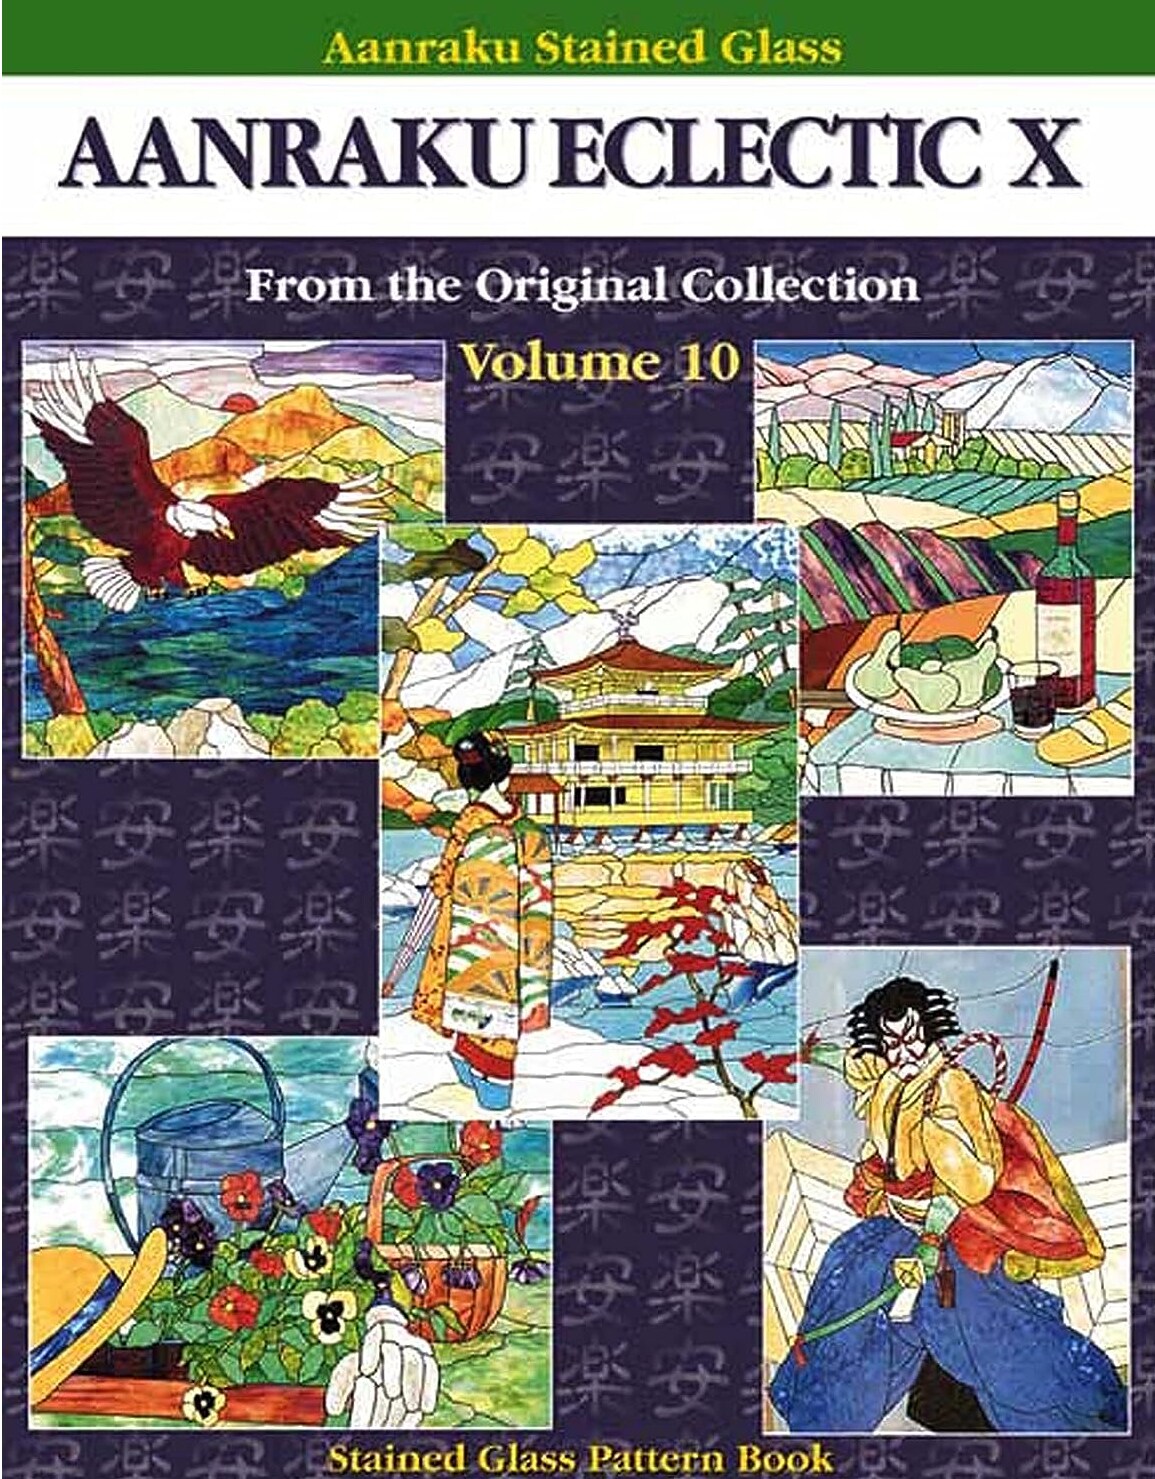 Stained Glass Pattern Book: Aanraku Eclectic Stained Glass Pattern Book Volume 10